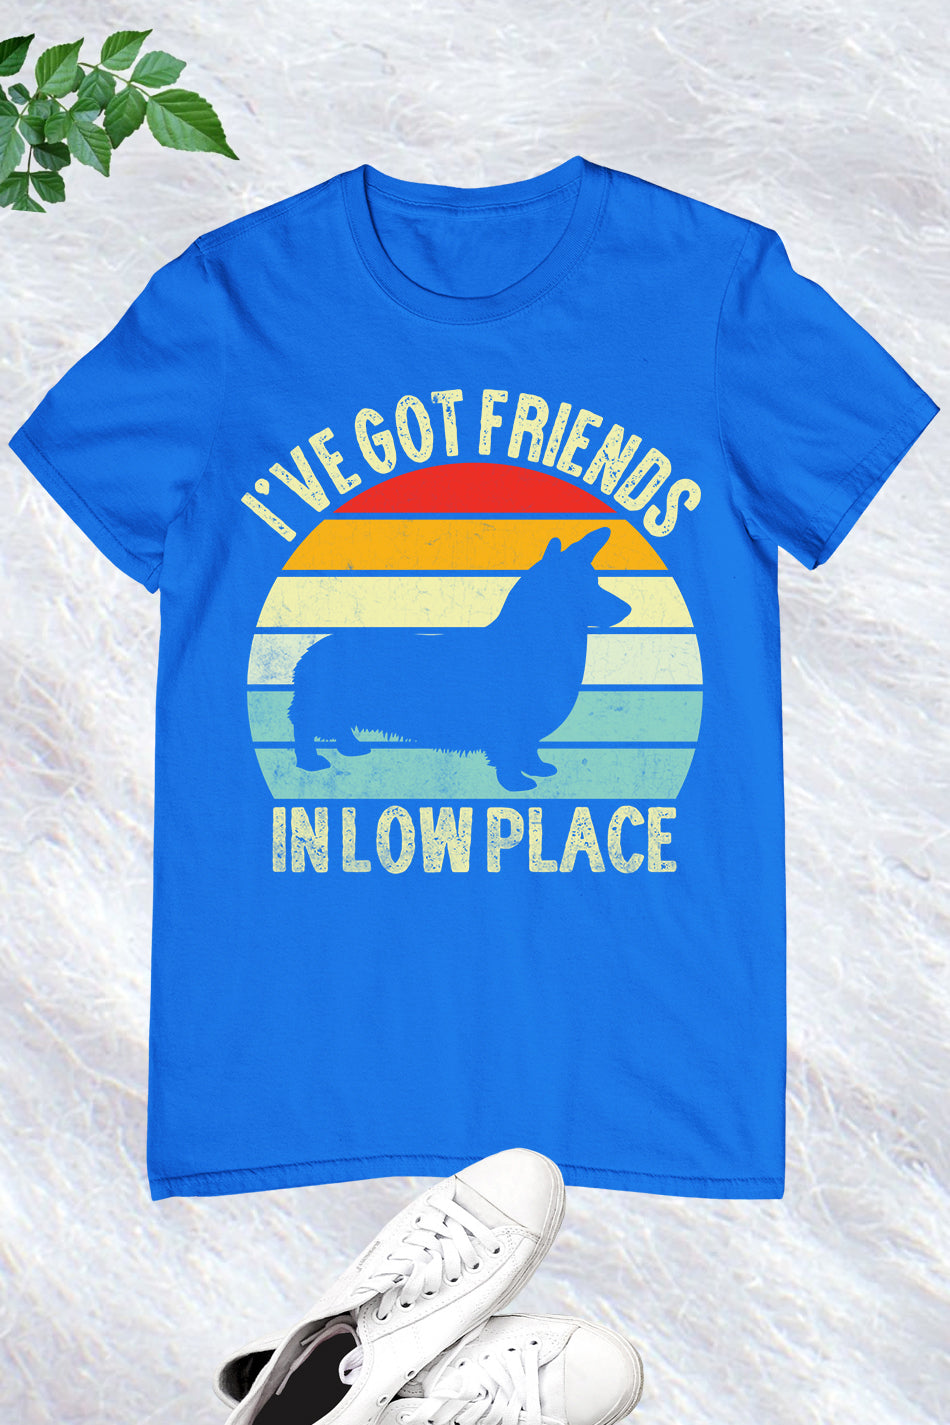 Show off your furry friend's country style with the I've Got Friends in Low Place Dog Shirt. Featuring a fun and catchy phrase, this shirt not only adds a touch of humor but also keeps your dog looking stylish and comfortable. Made with high-quality fabric, this shirt is perfect for everyday wear or special occasions.